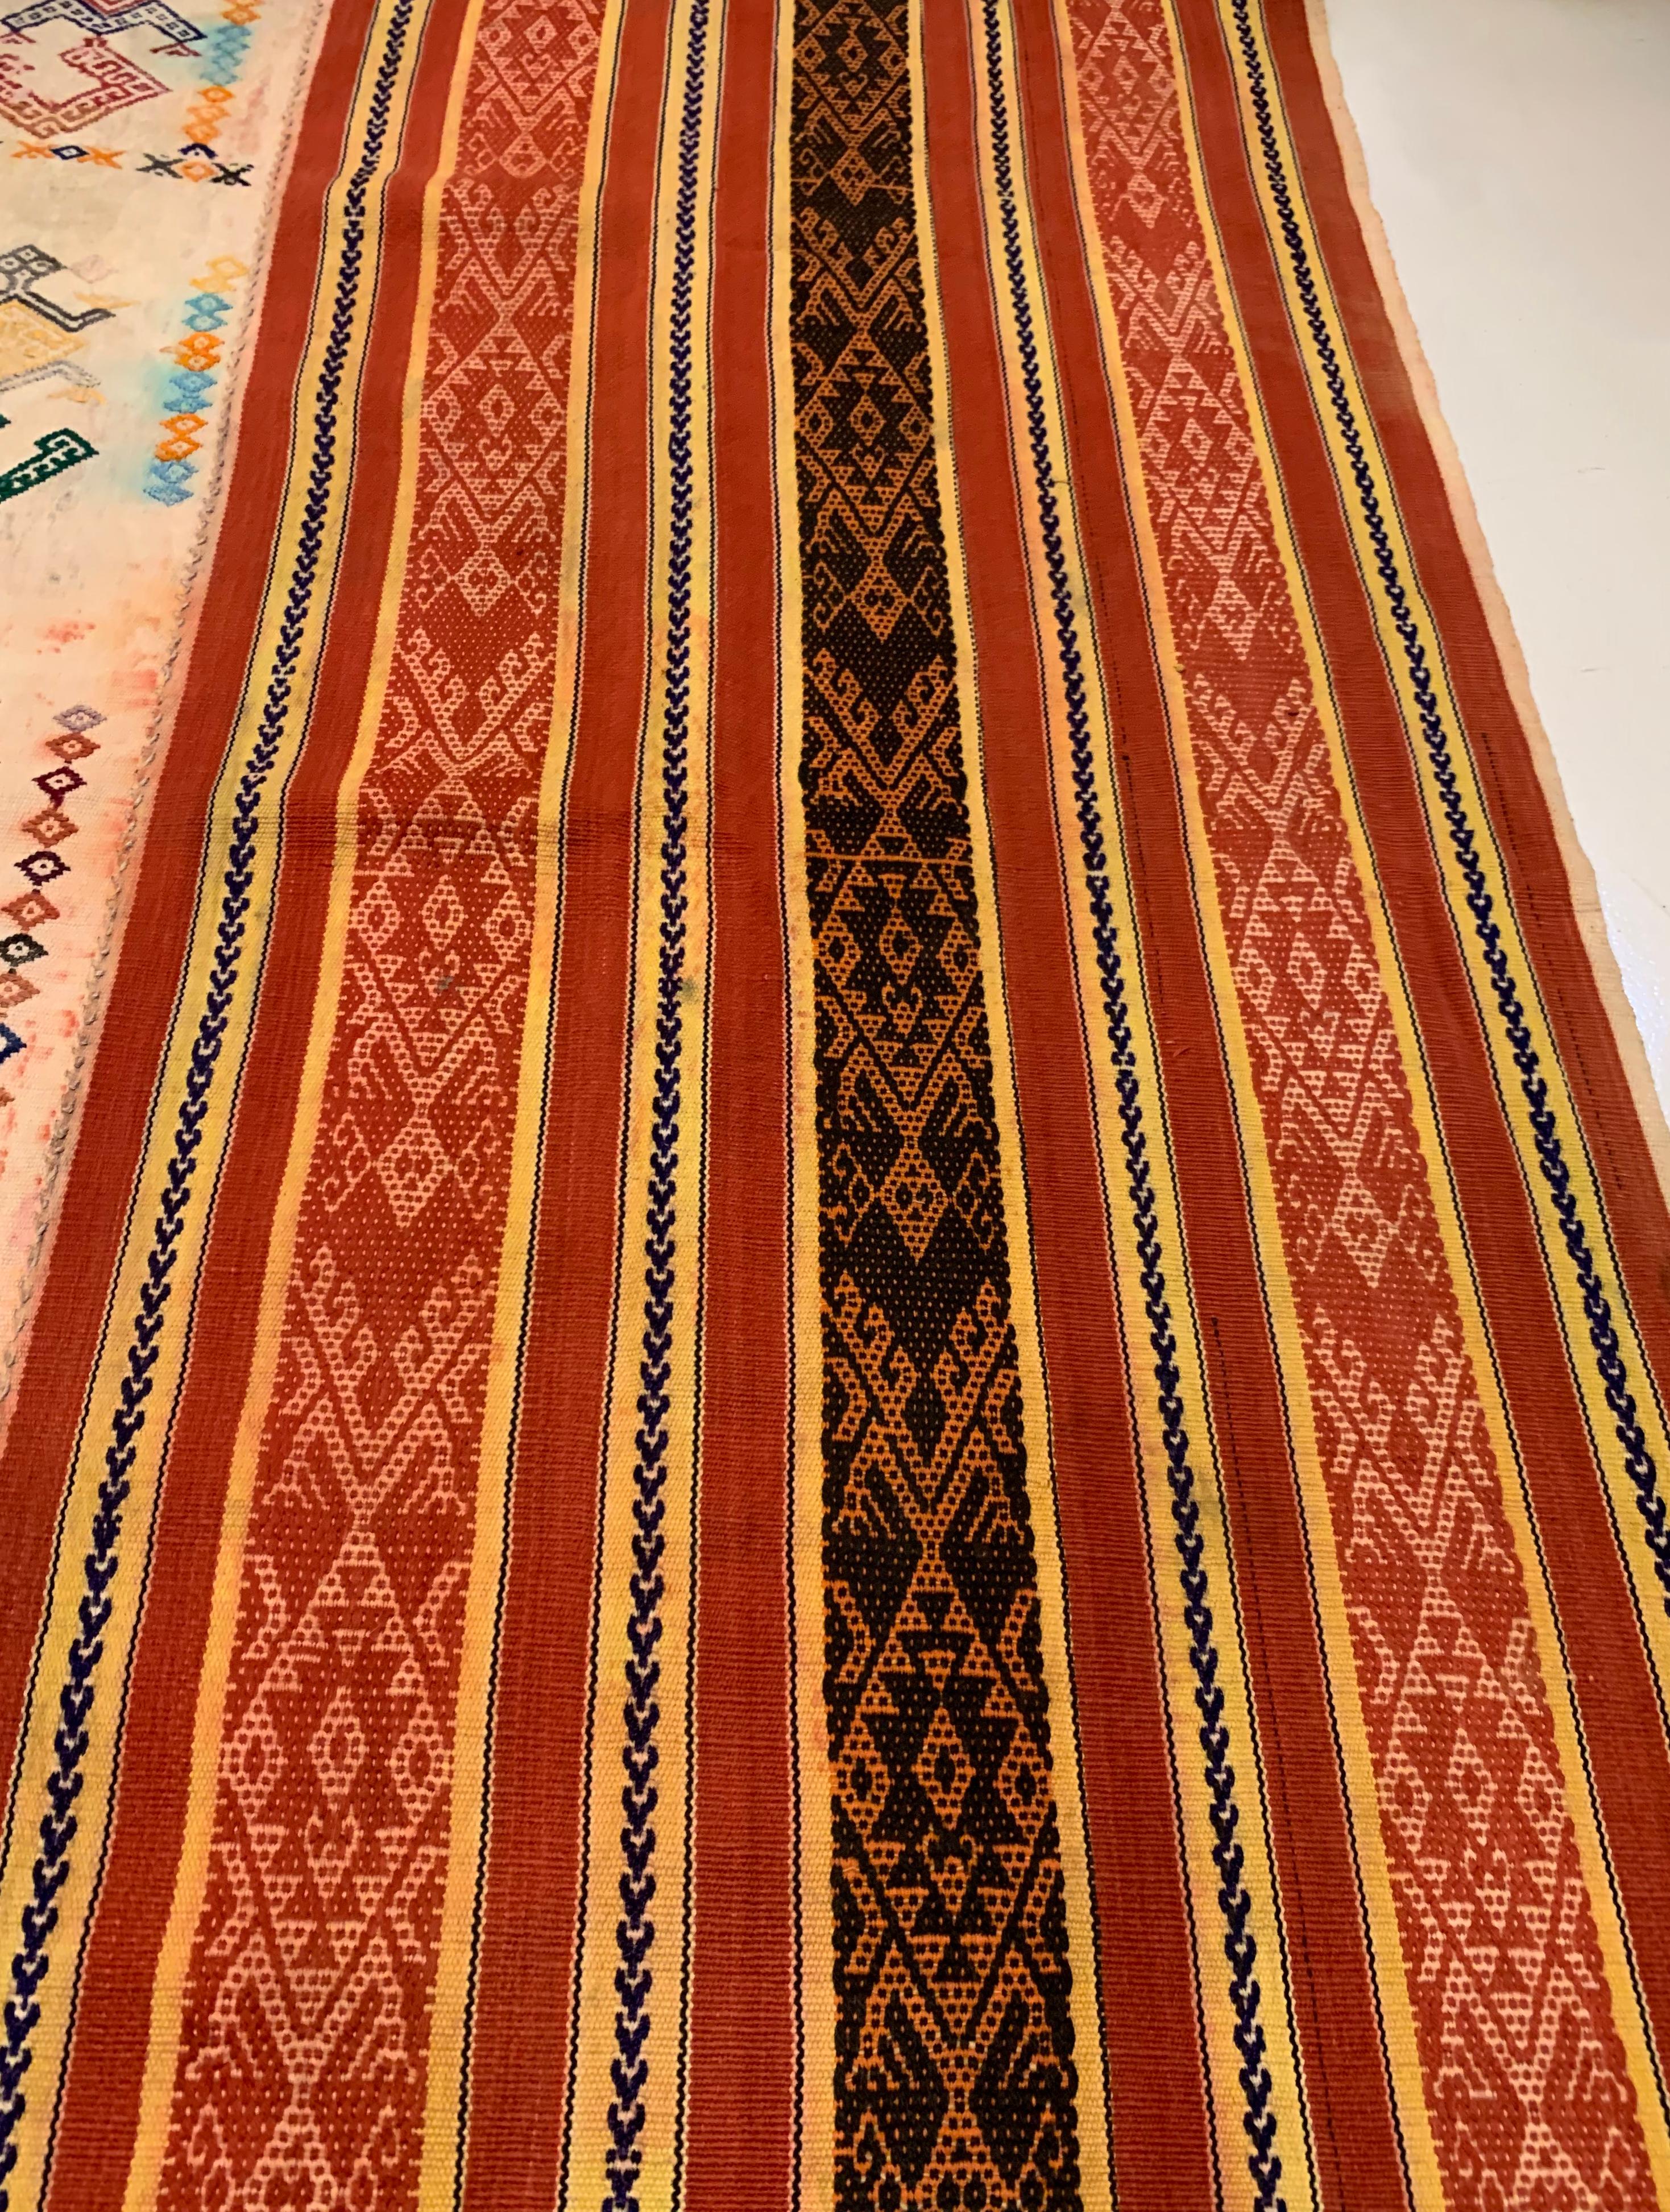 Yarn Ikat Textile from Timor Stunning Tribal Motifs & Colors, Indonesia c. 1950 For Sale